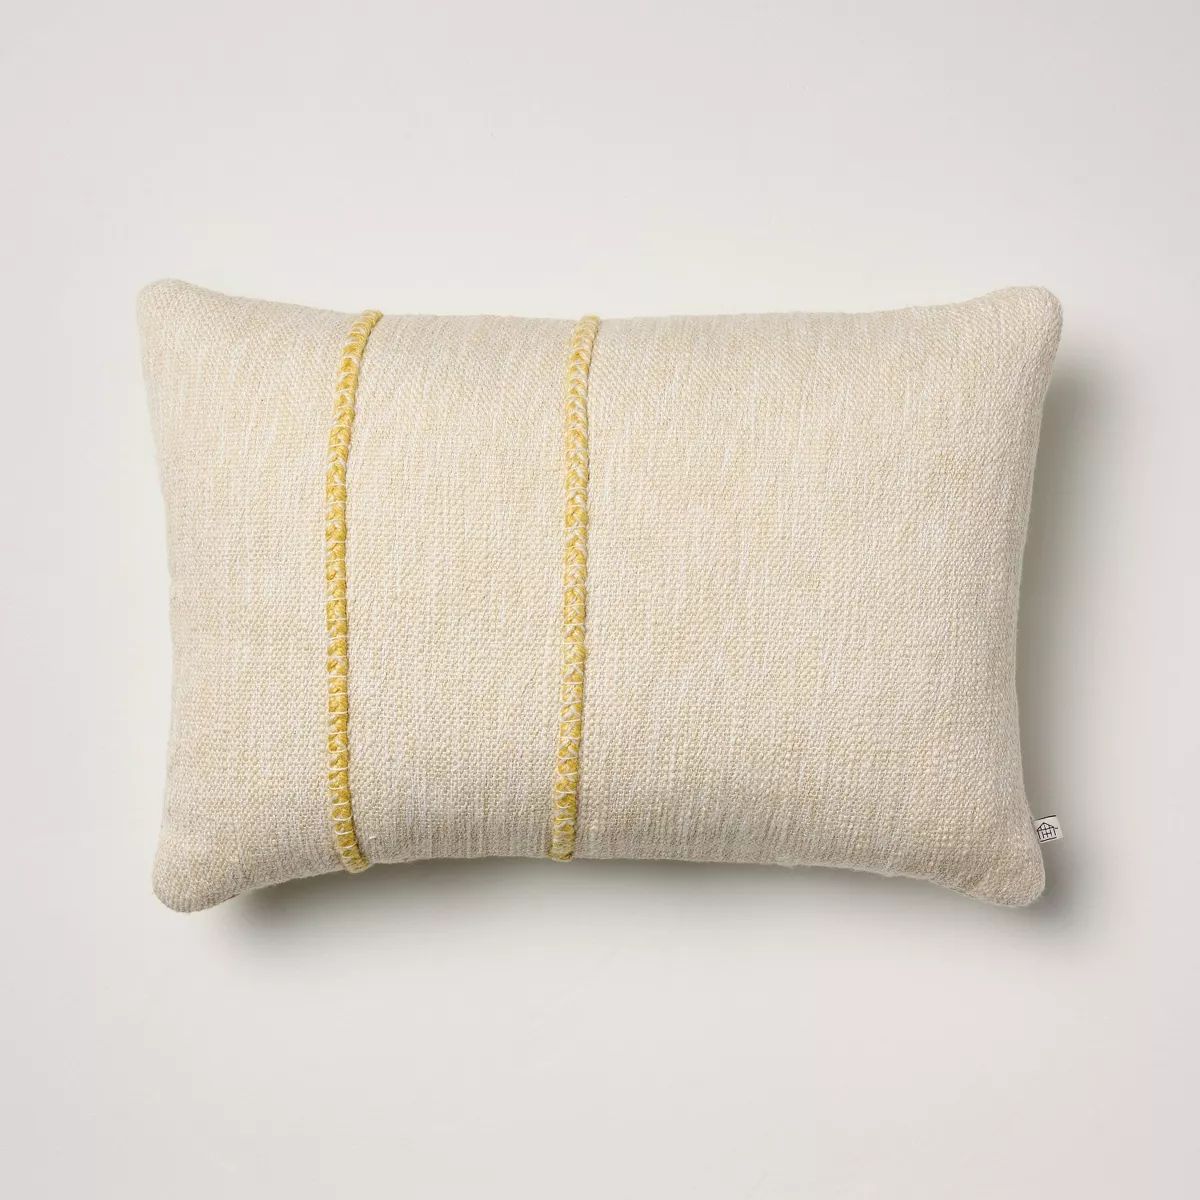 14"x20" Braided Stripe Indoor/Outdoor Lumbar Throw Pillow Natural/Yellow - Hearth & Hand™ with ... | Target